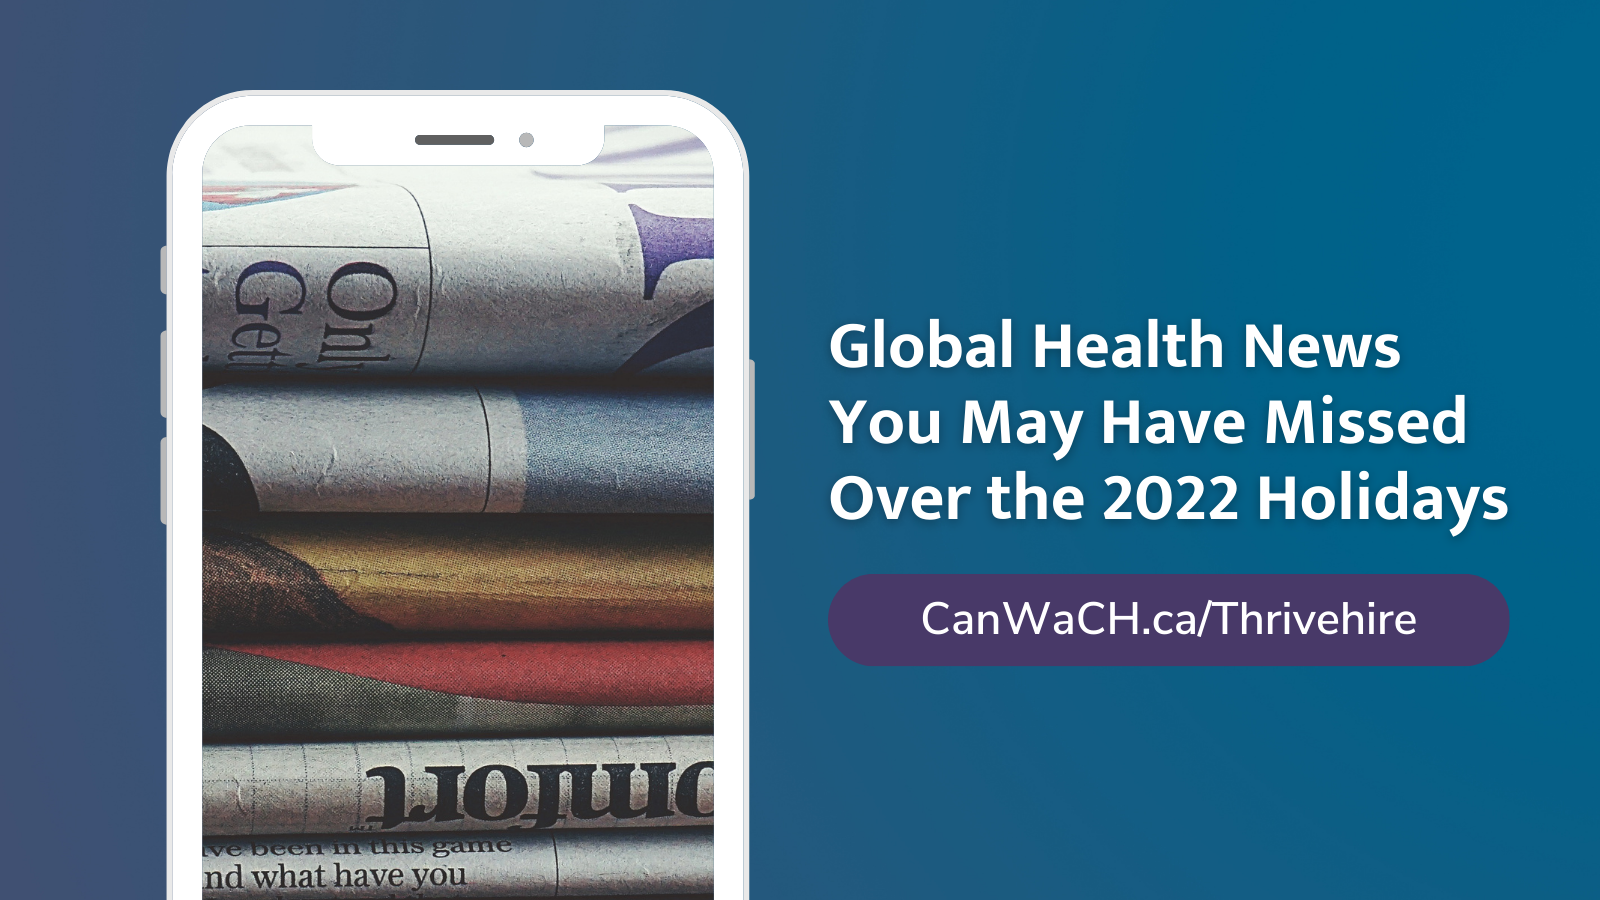 Get Caught Up on the Latest Global Health News You May Have Missed During the 2022 Holidays